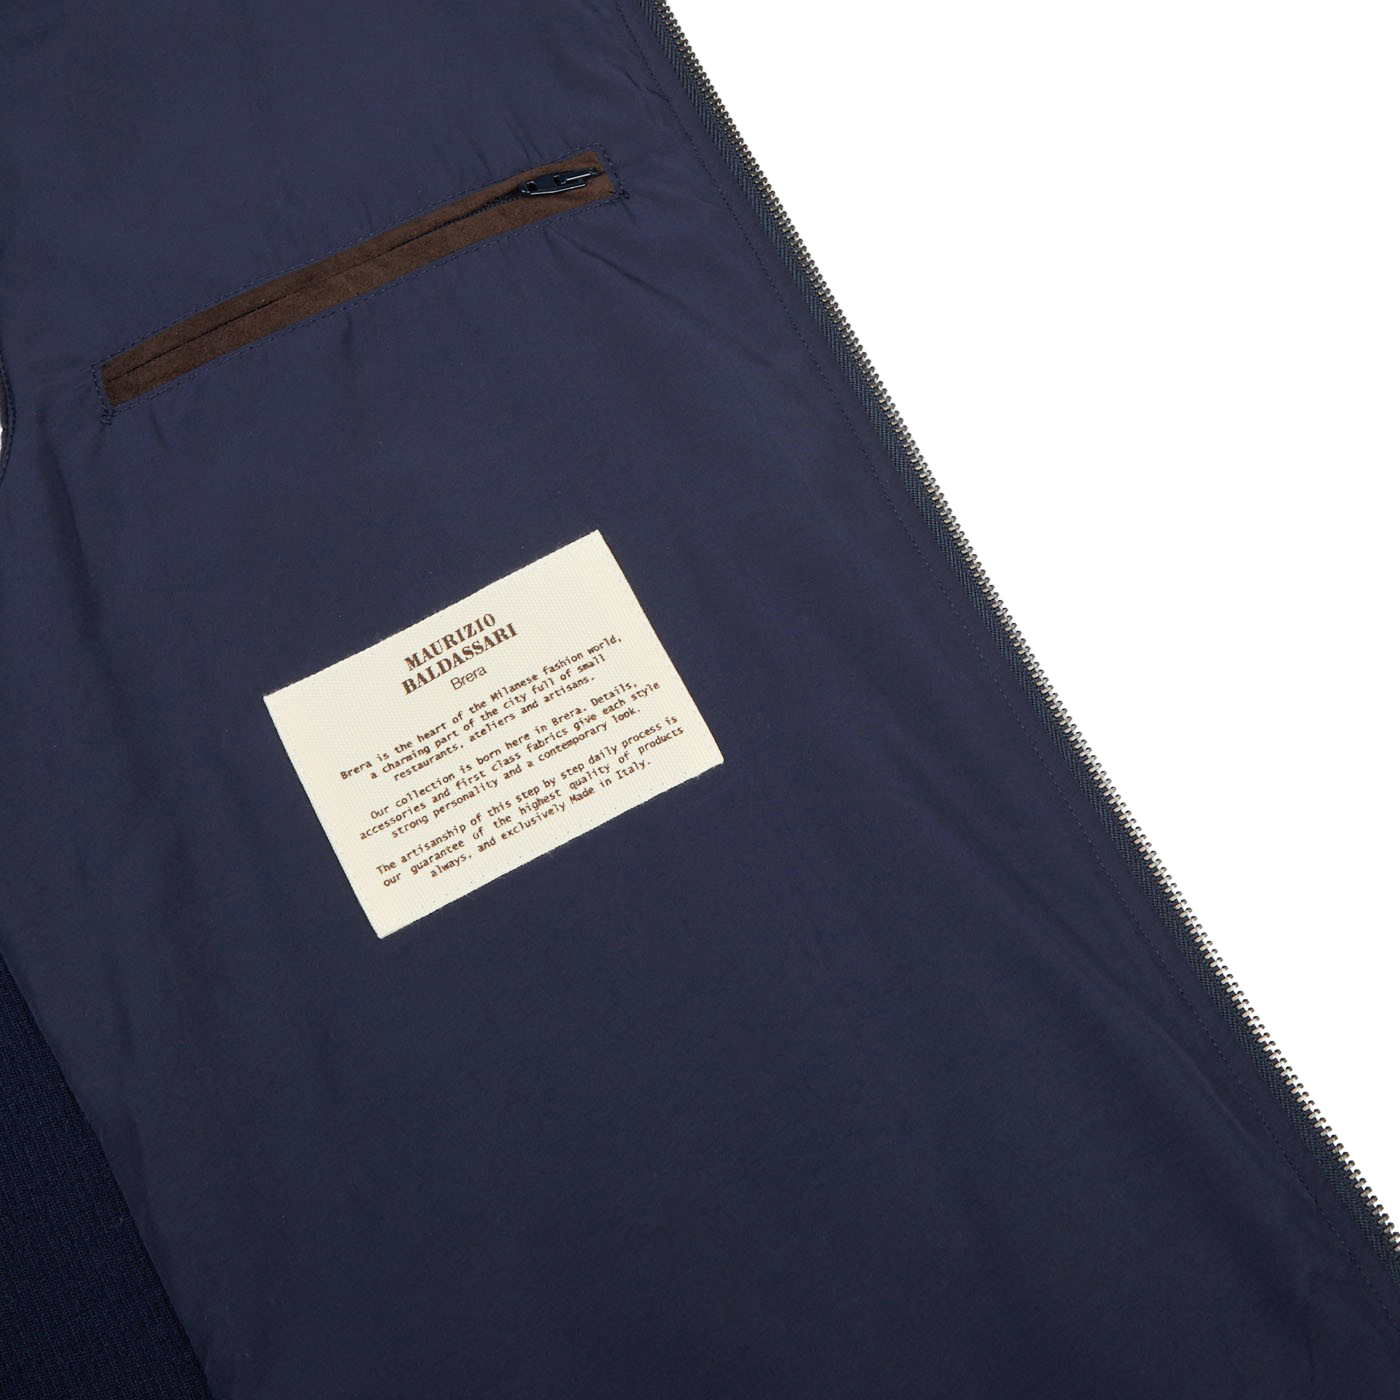 A Navy Water Repellent Pure Cashmere Gilet from Maurizio Baldassari with a label on it.